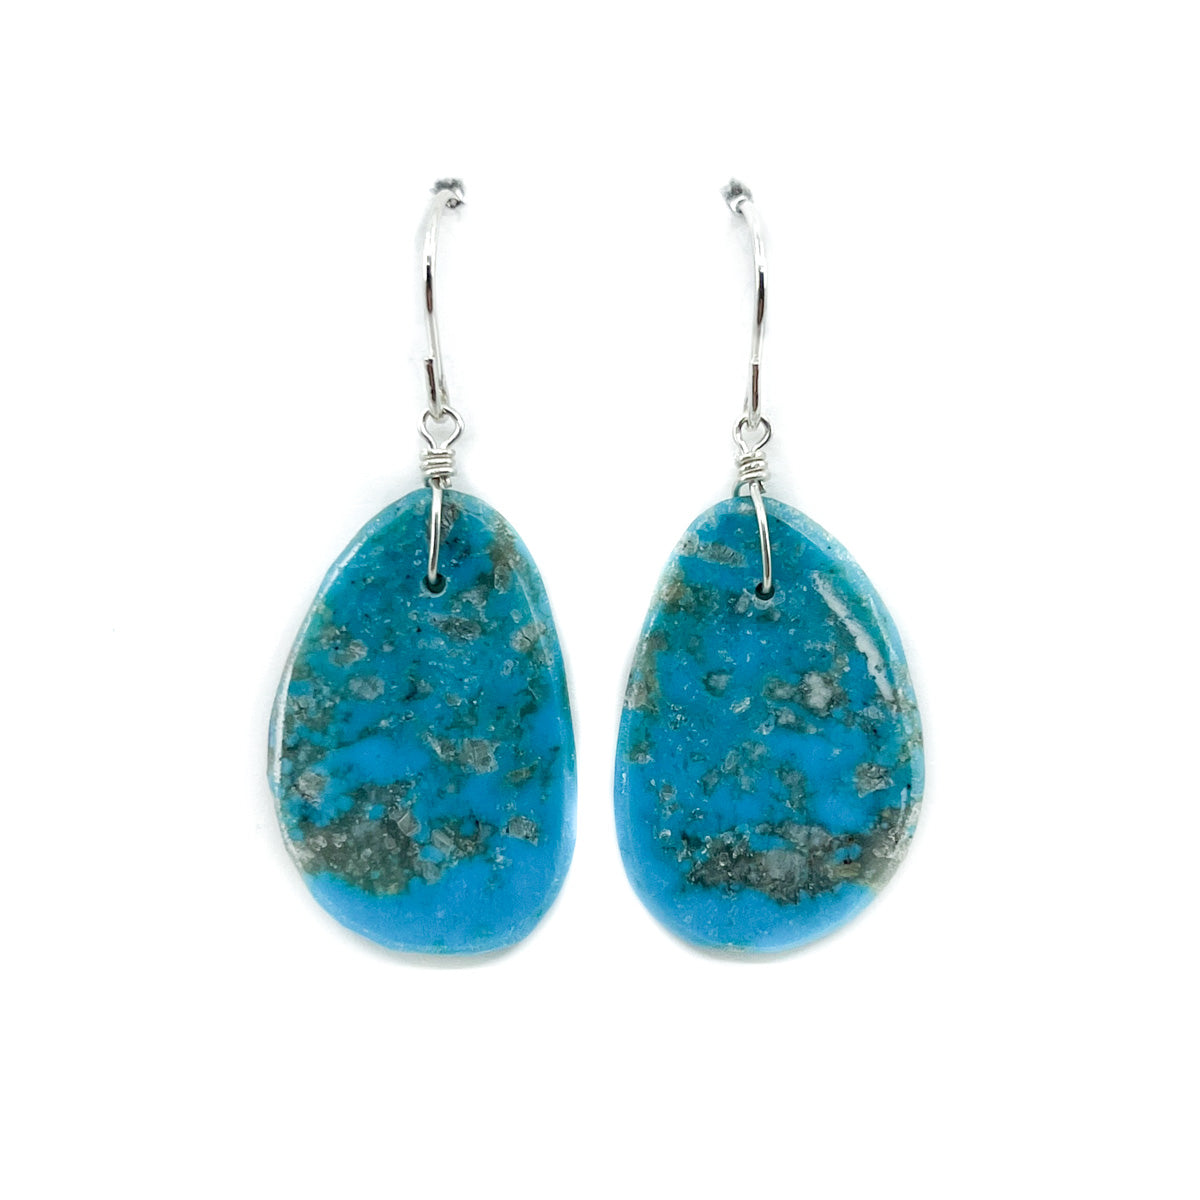 Turquoise Slab Earrings with Gray Matrix